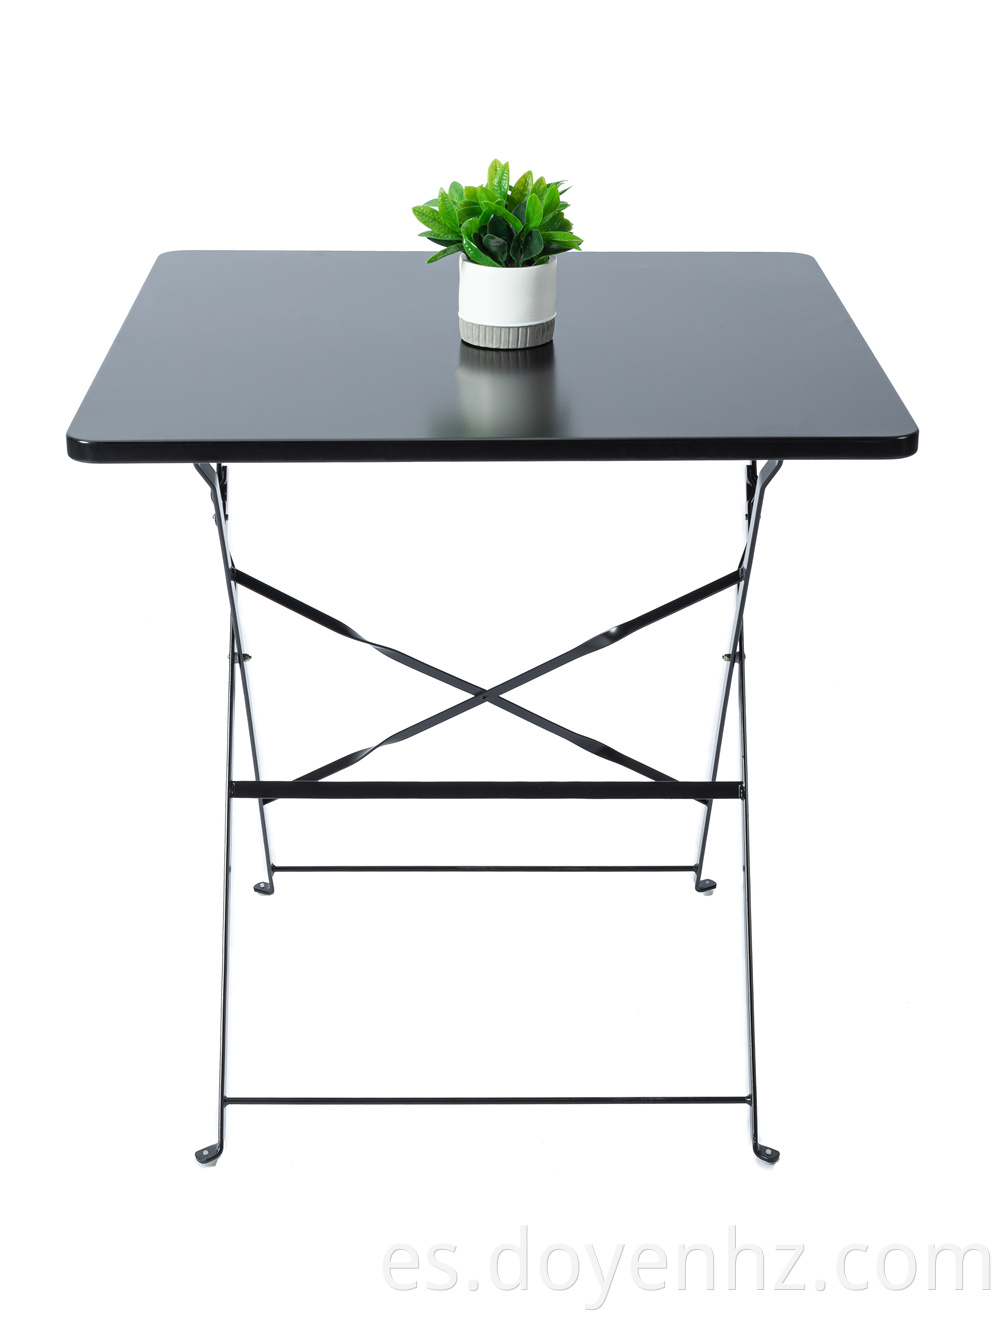 Metal Folding Square Table for Garden